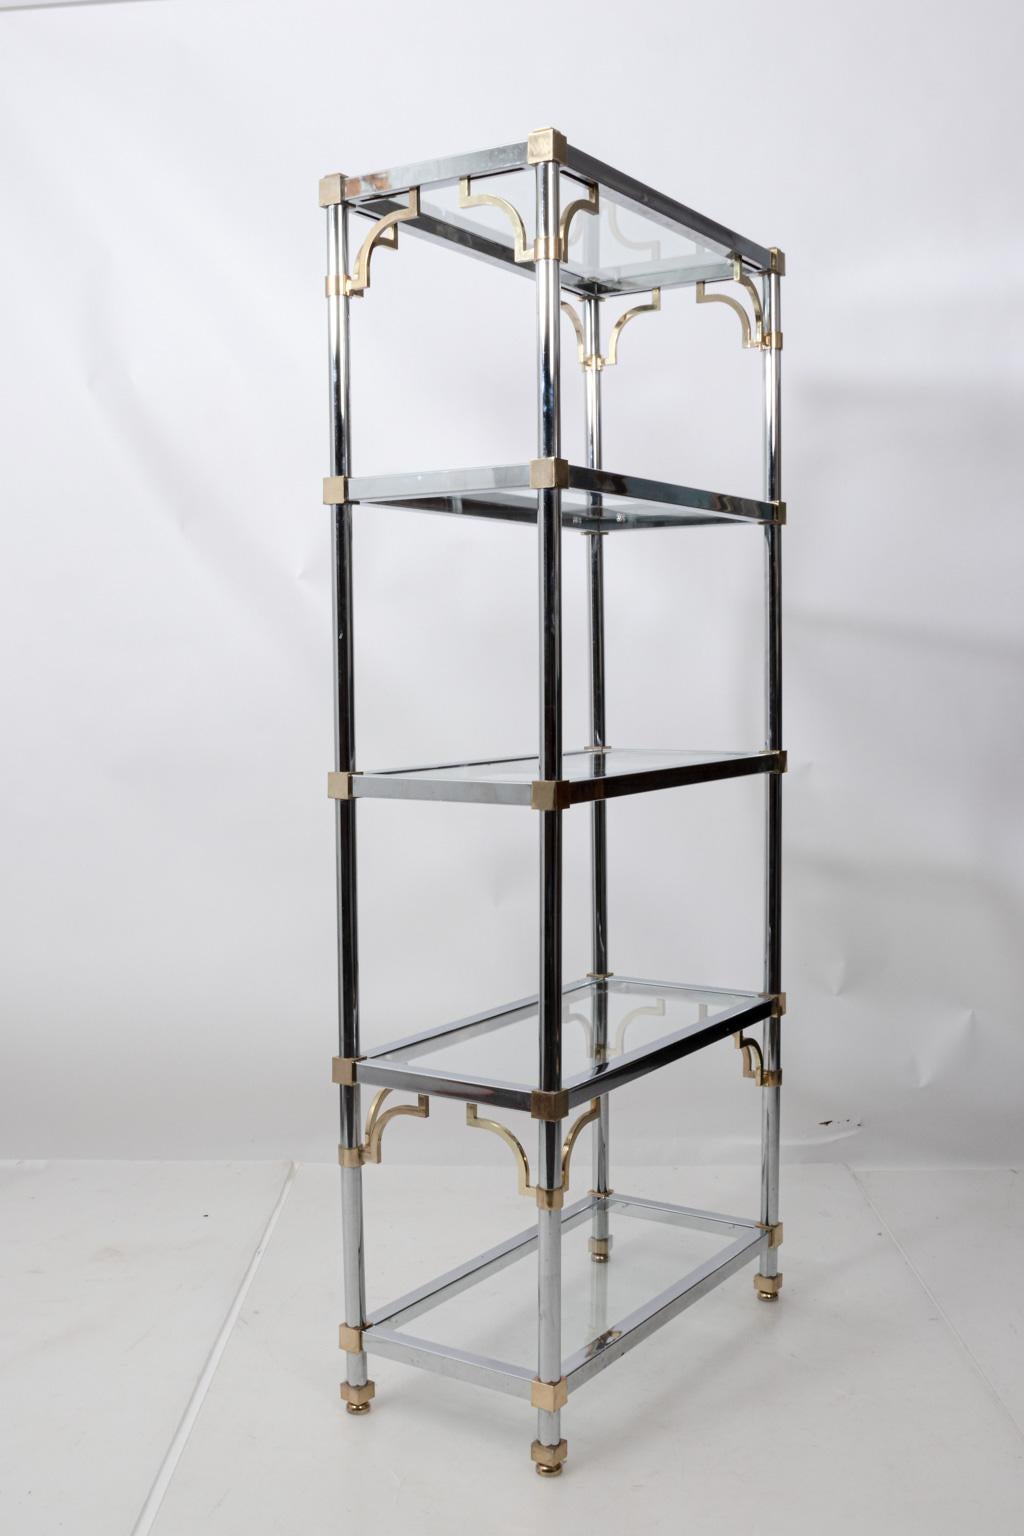 Five-tier glass top shelving unit by Maison Jansen with chrome and decorative brass ornament, circa 1970s. Please note of wear consistent with age including scratches to frame and glass top. One glass shelf is also chipped. Made in France.